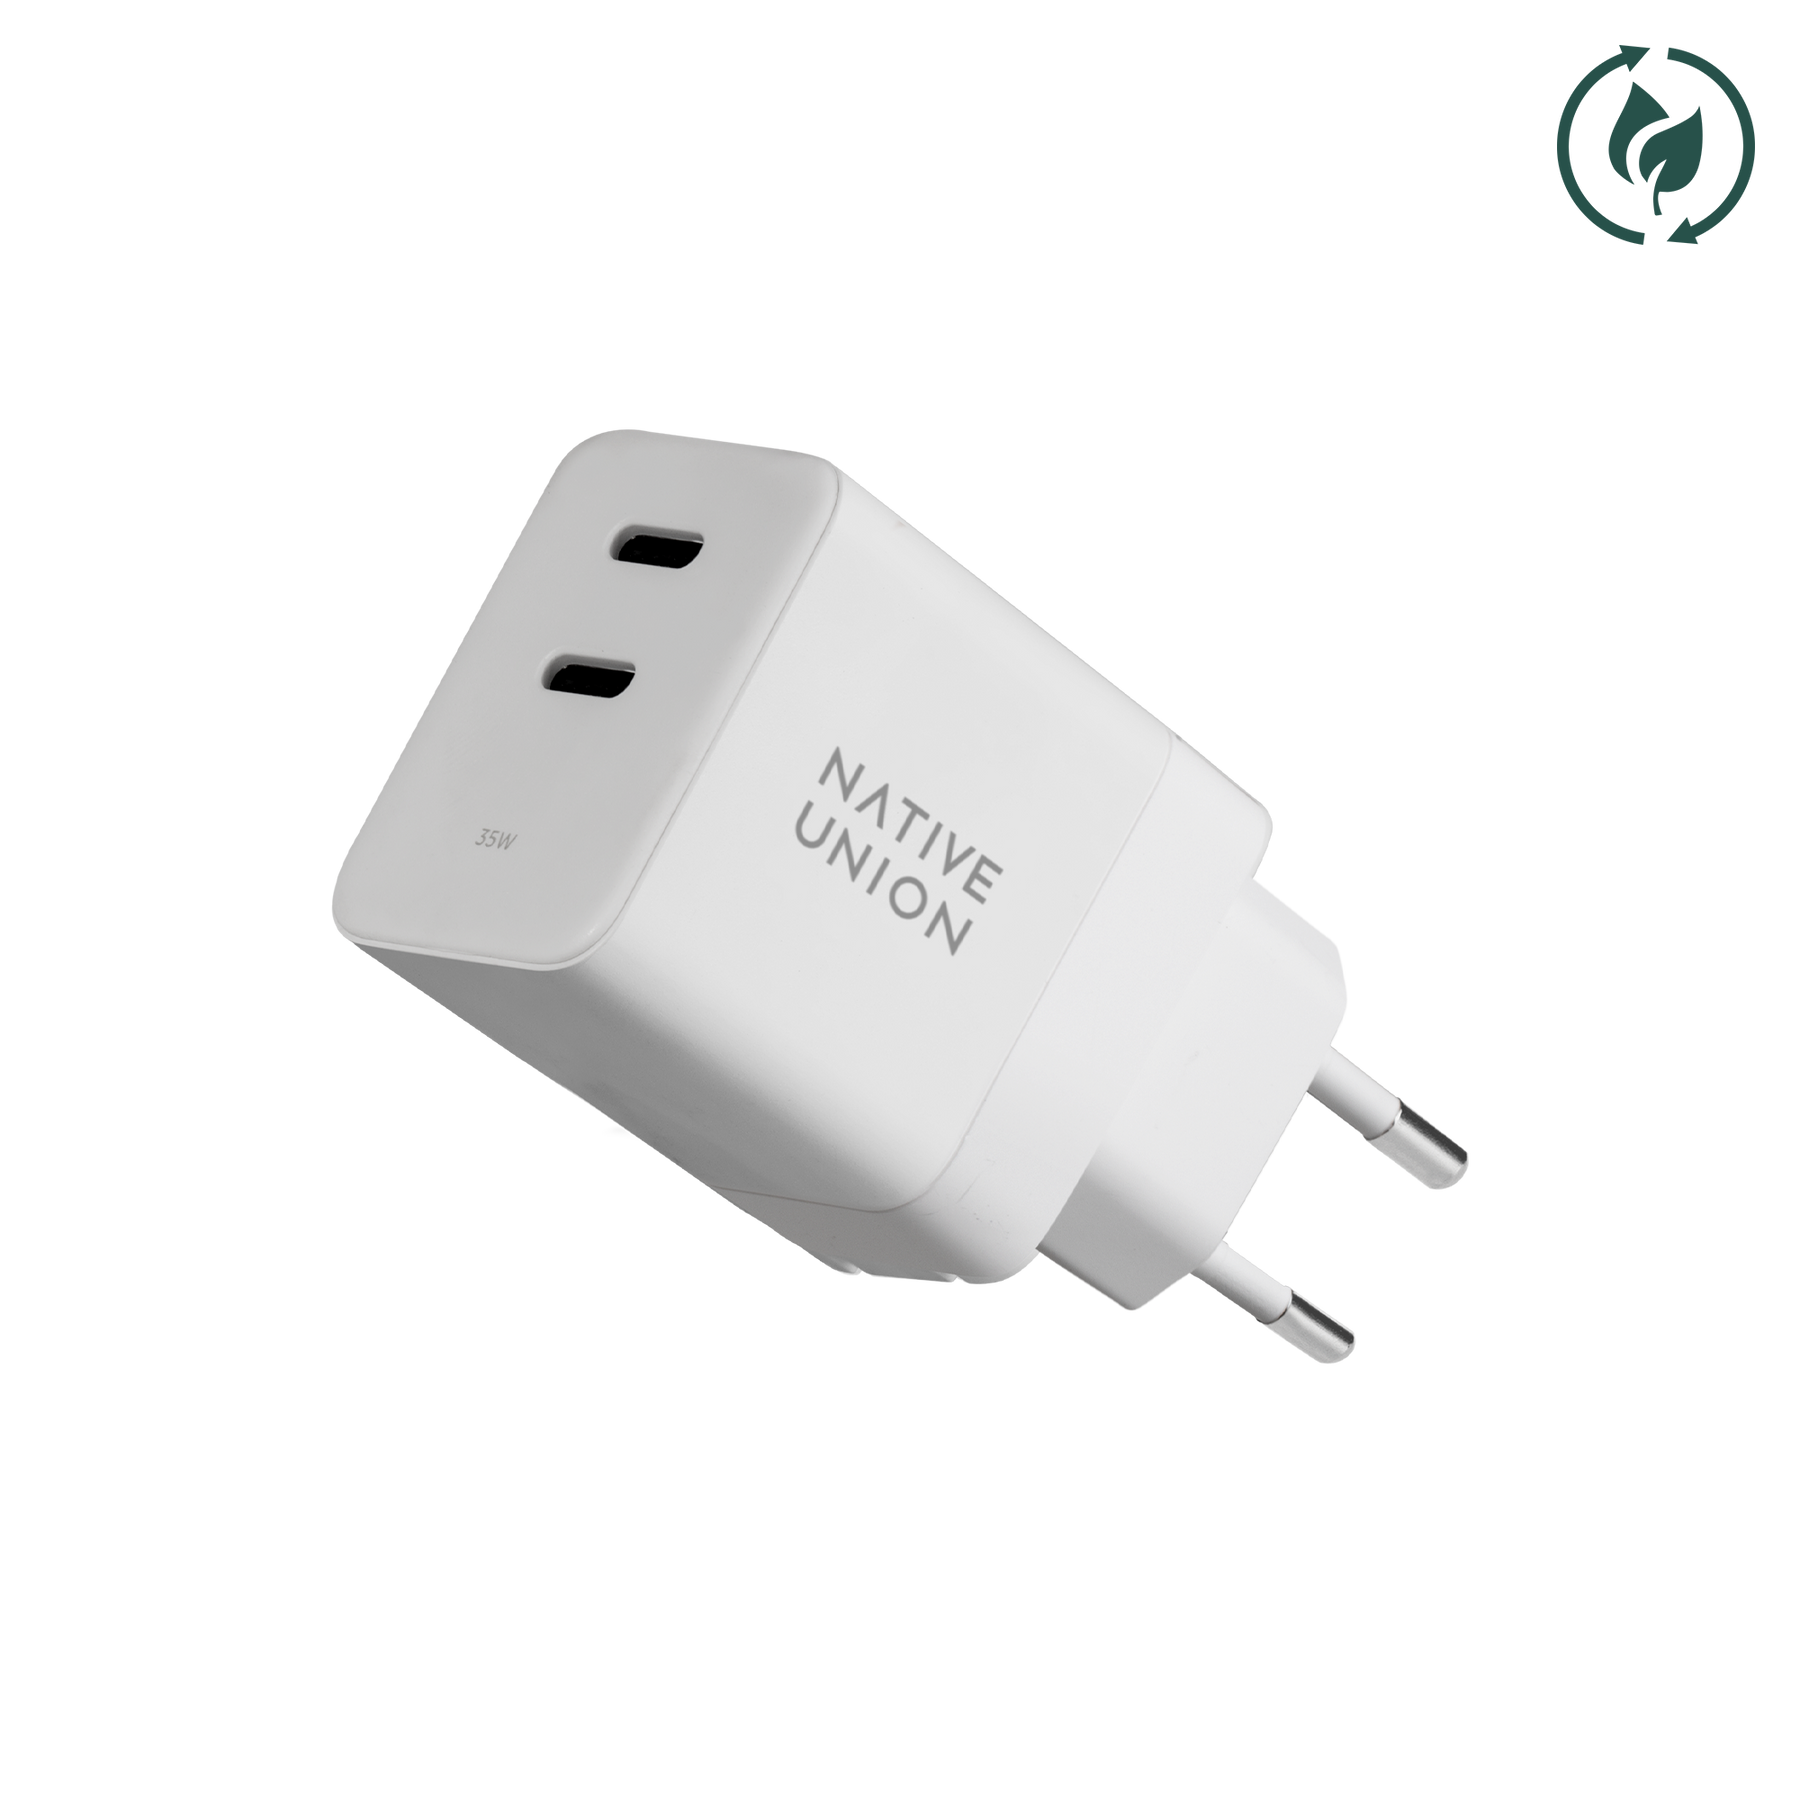 35W GaN Wall Charger